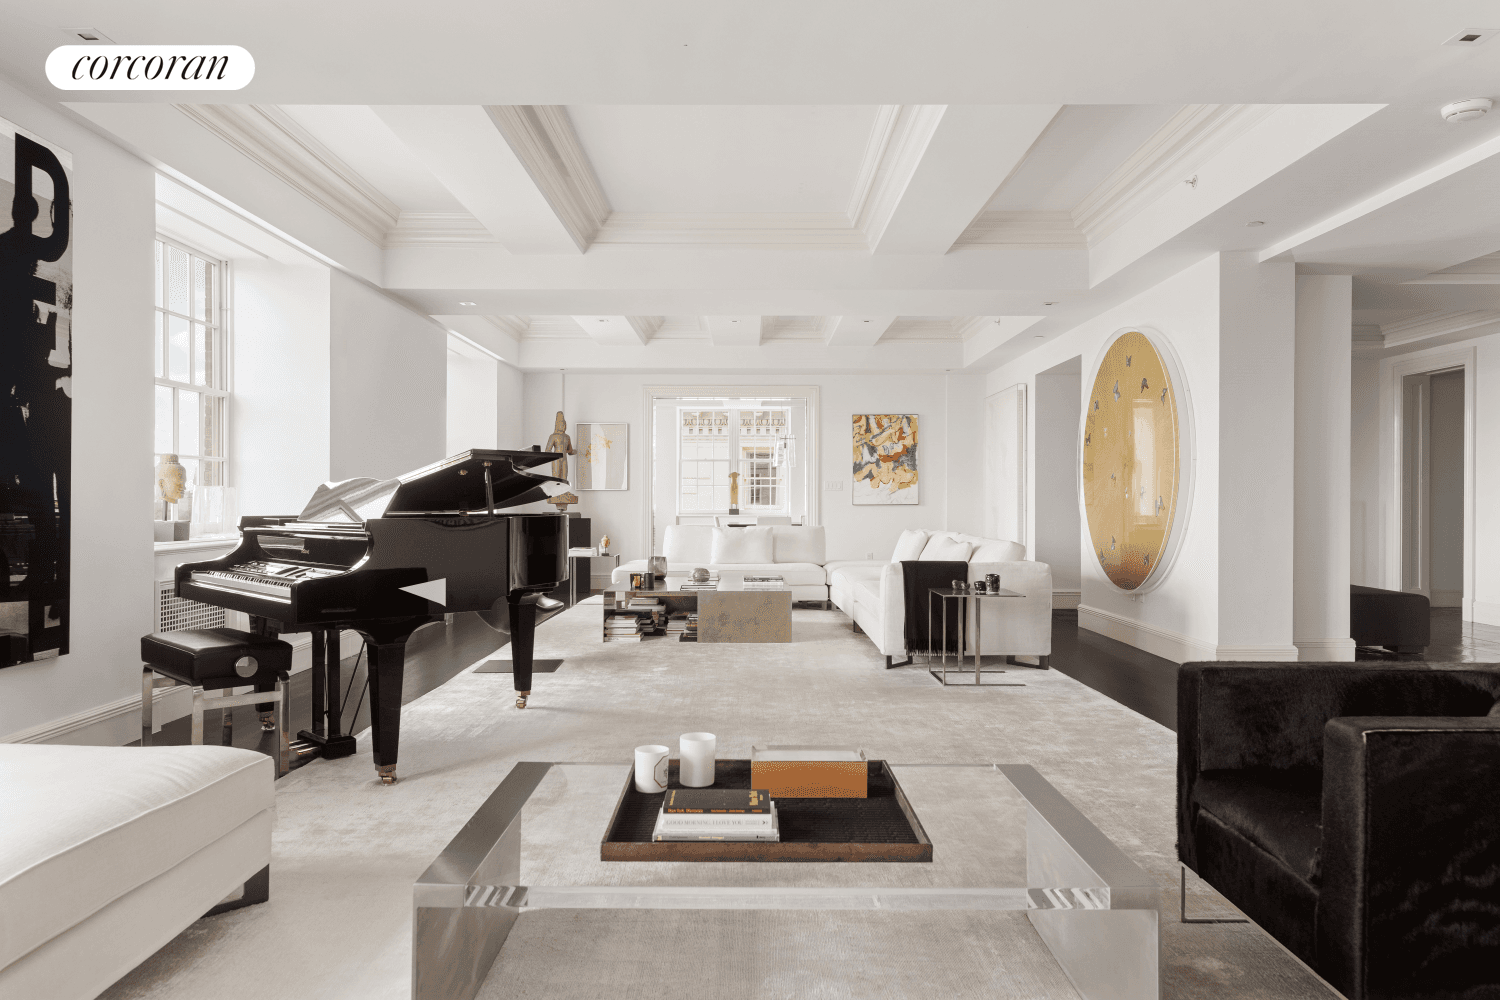 995 Fifth Avenue The StanhopeRare Opportunity Designed by Rosario Candela9 Bedrooms 9.